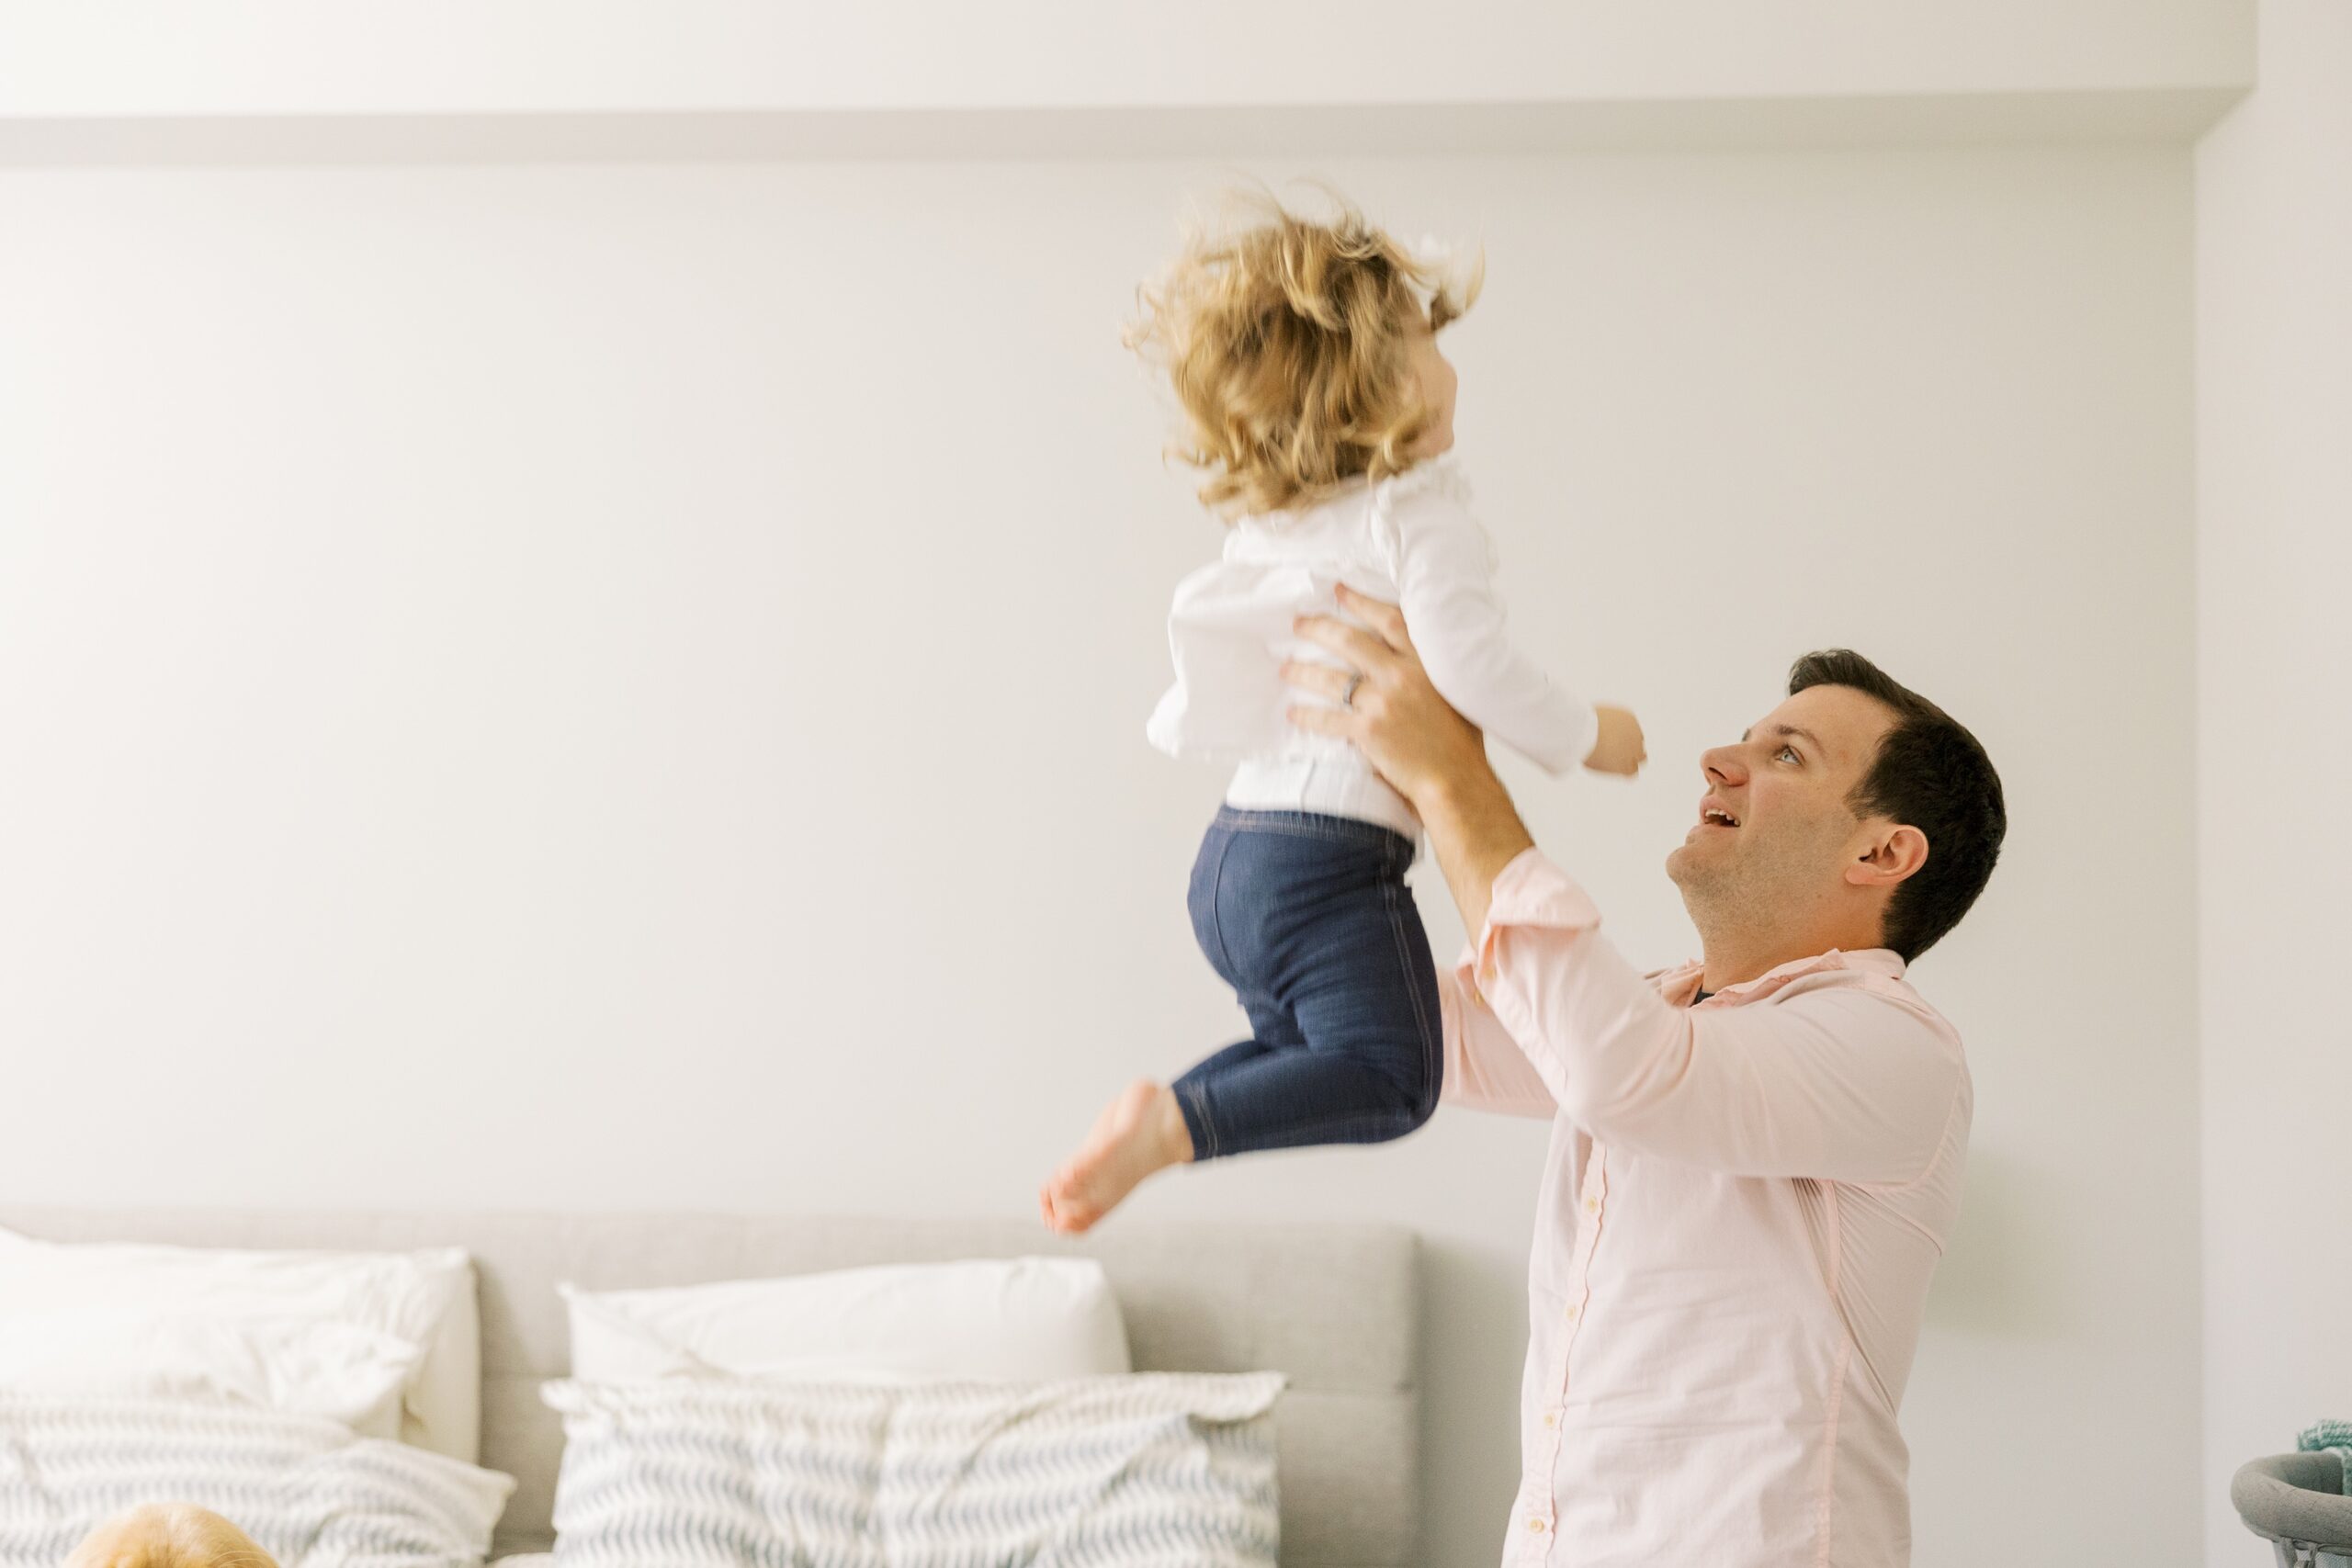 Dad plays with toddler during at home photo session